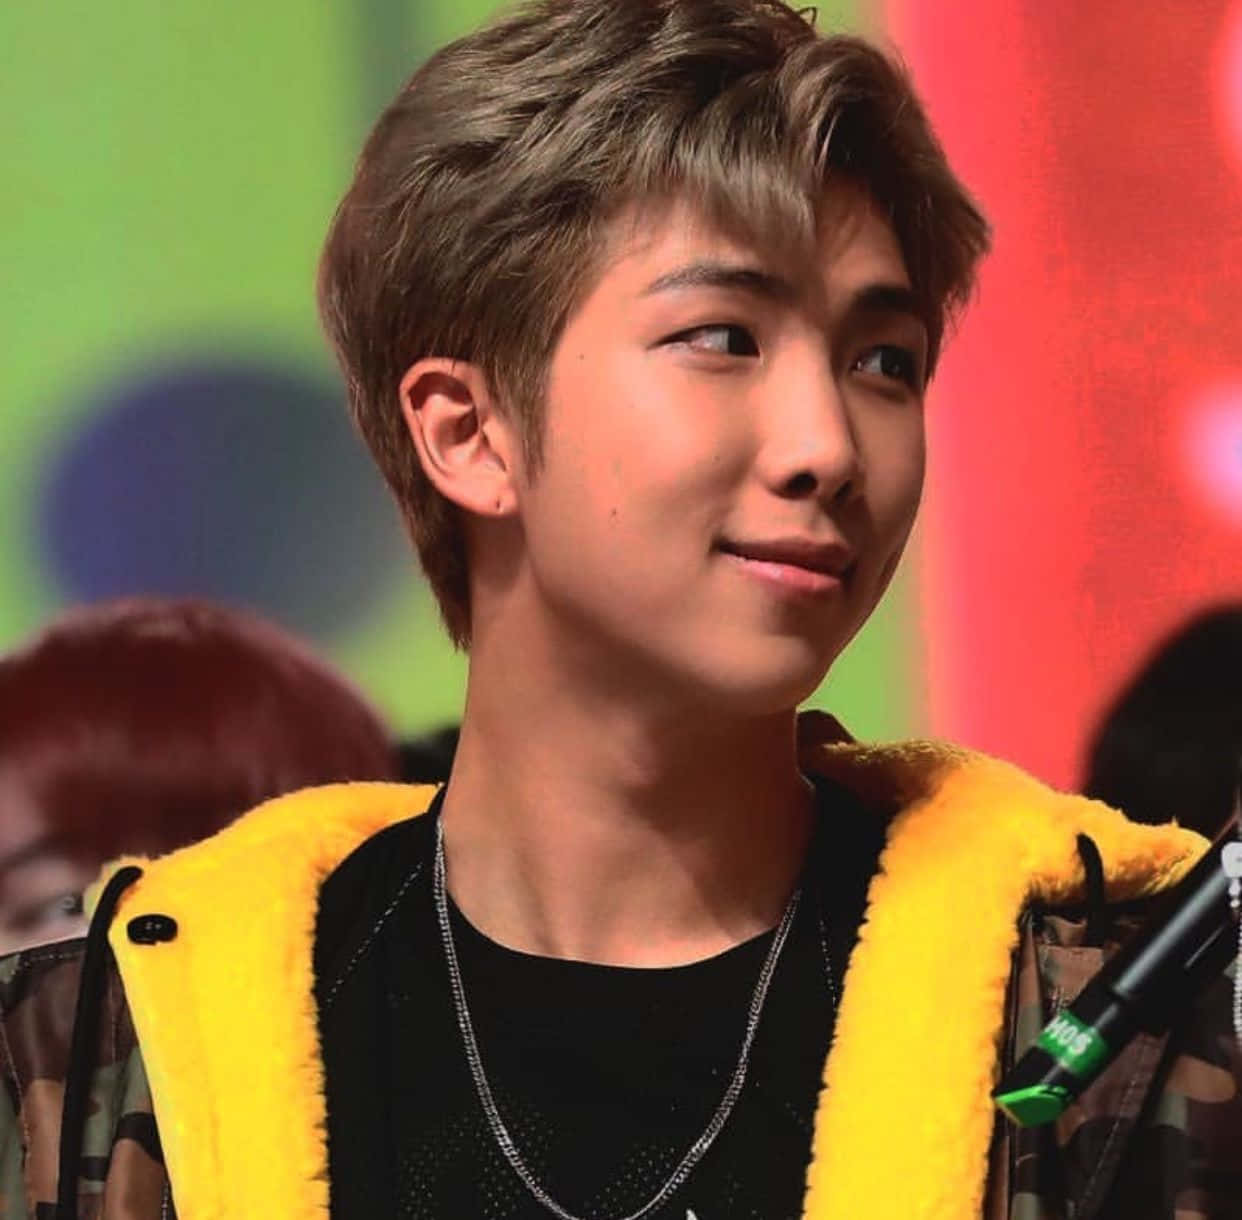 BTS Rap Monster Unleashes His Charisma in a Live Performance Wallpaper